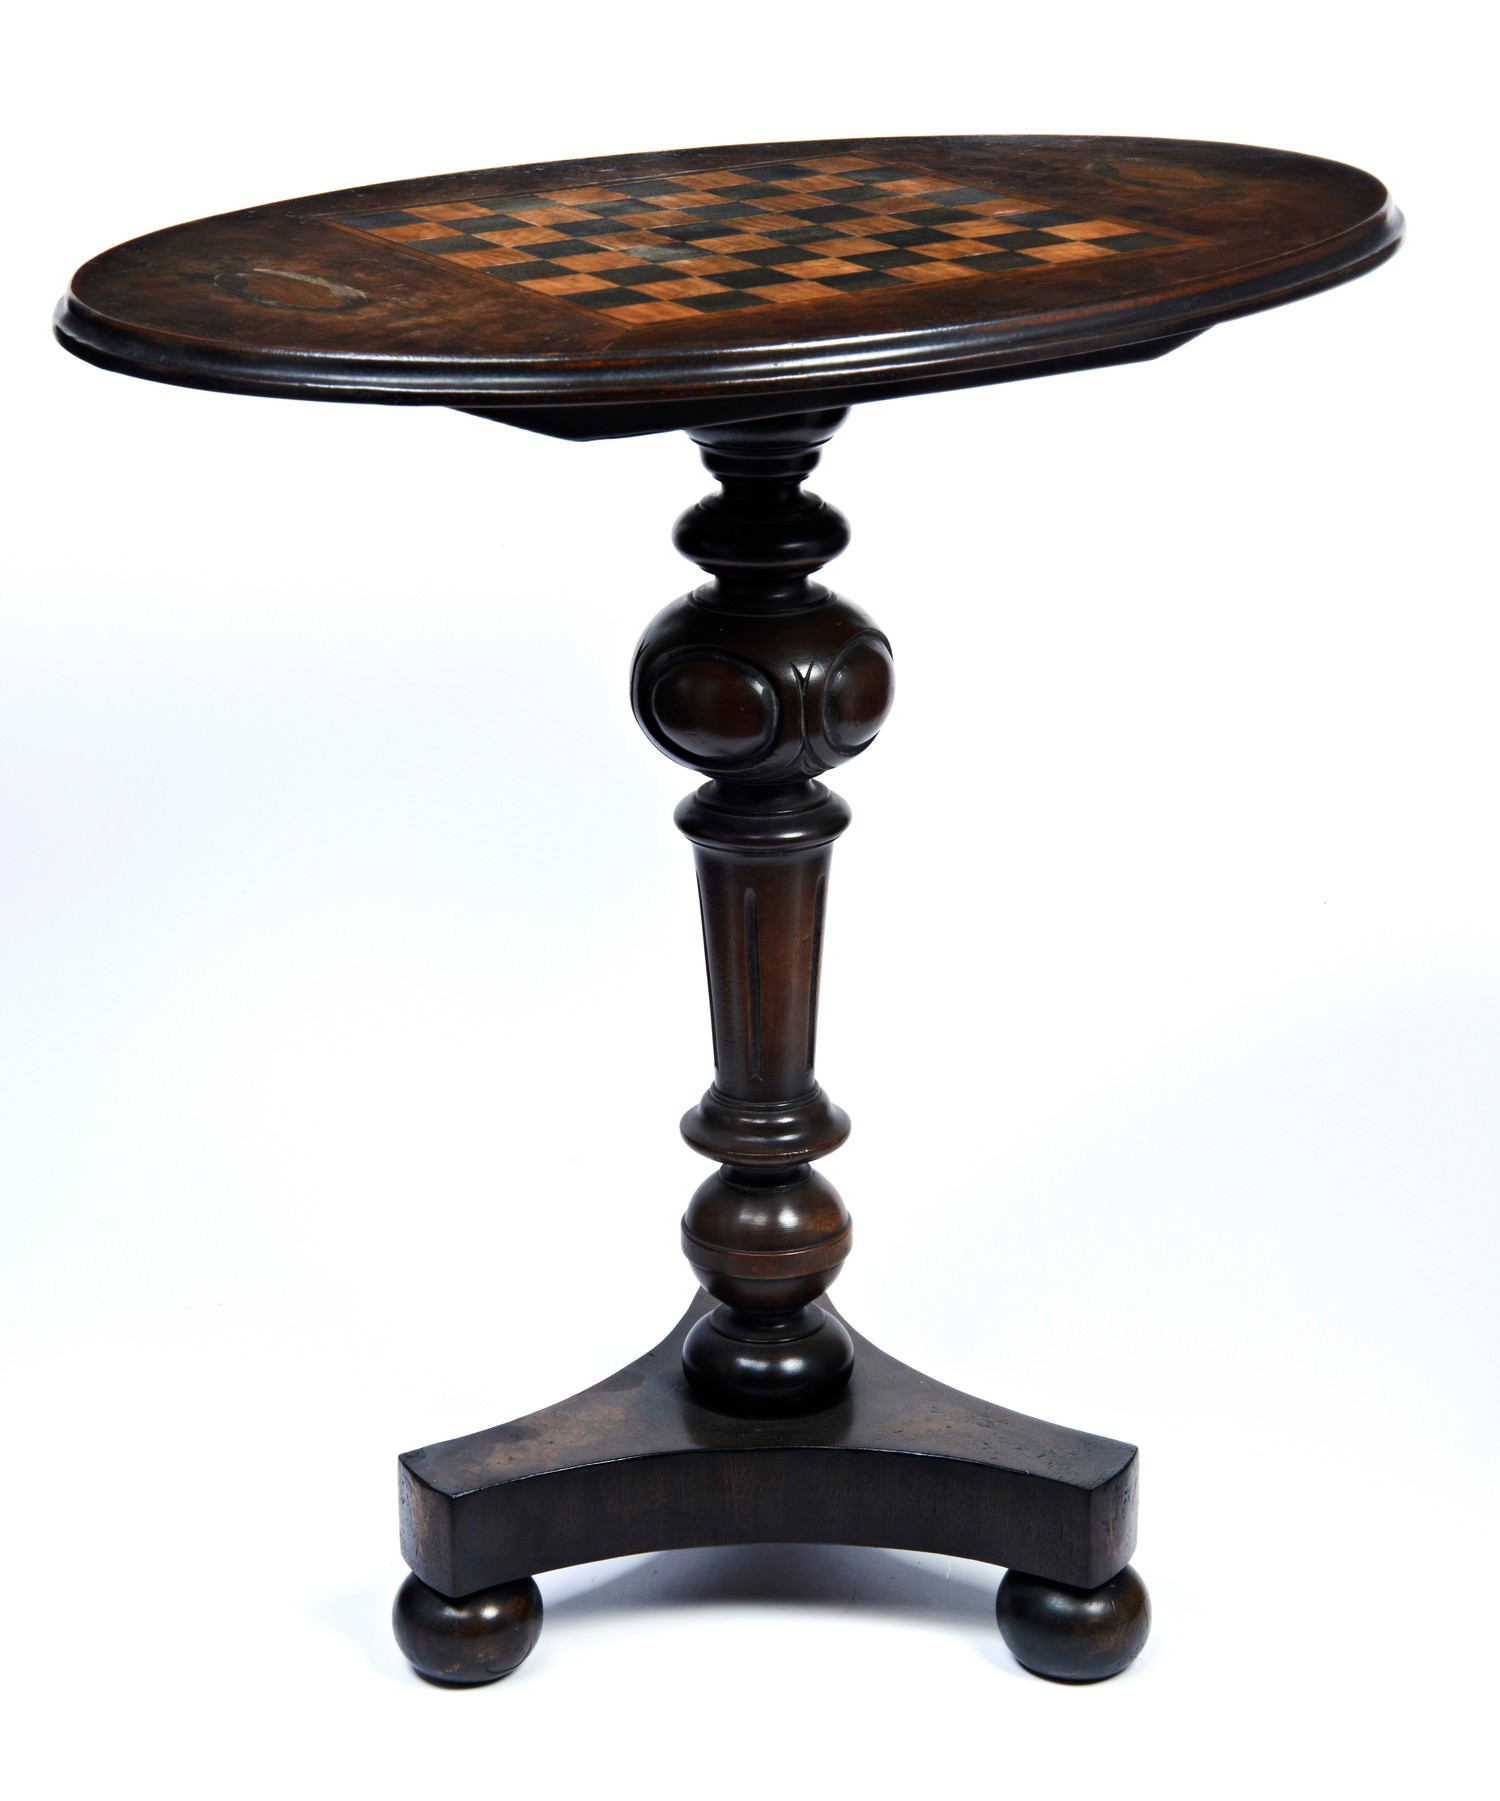 A 19TH CENTURY GAMES TABLE the oval top with chess board inlay and two shell patera, the column upon